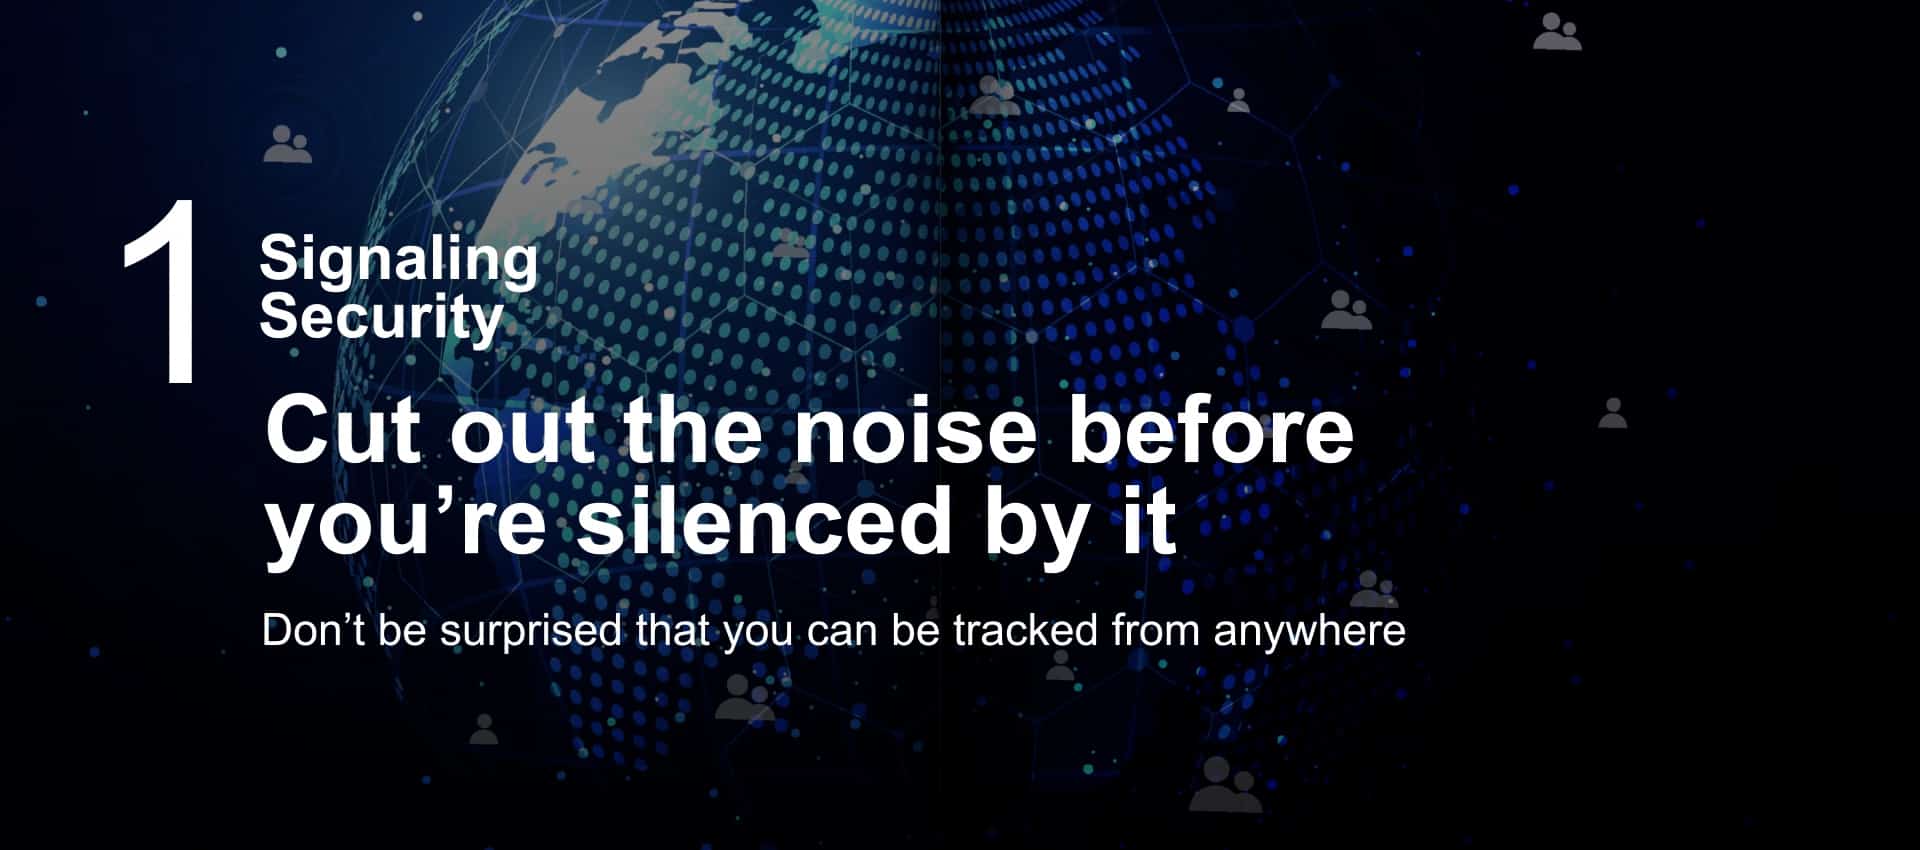 Trend 1: Signaling Security: Cutting out the noise before operators are silenced by it